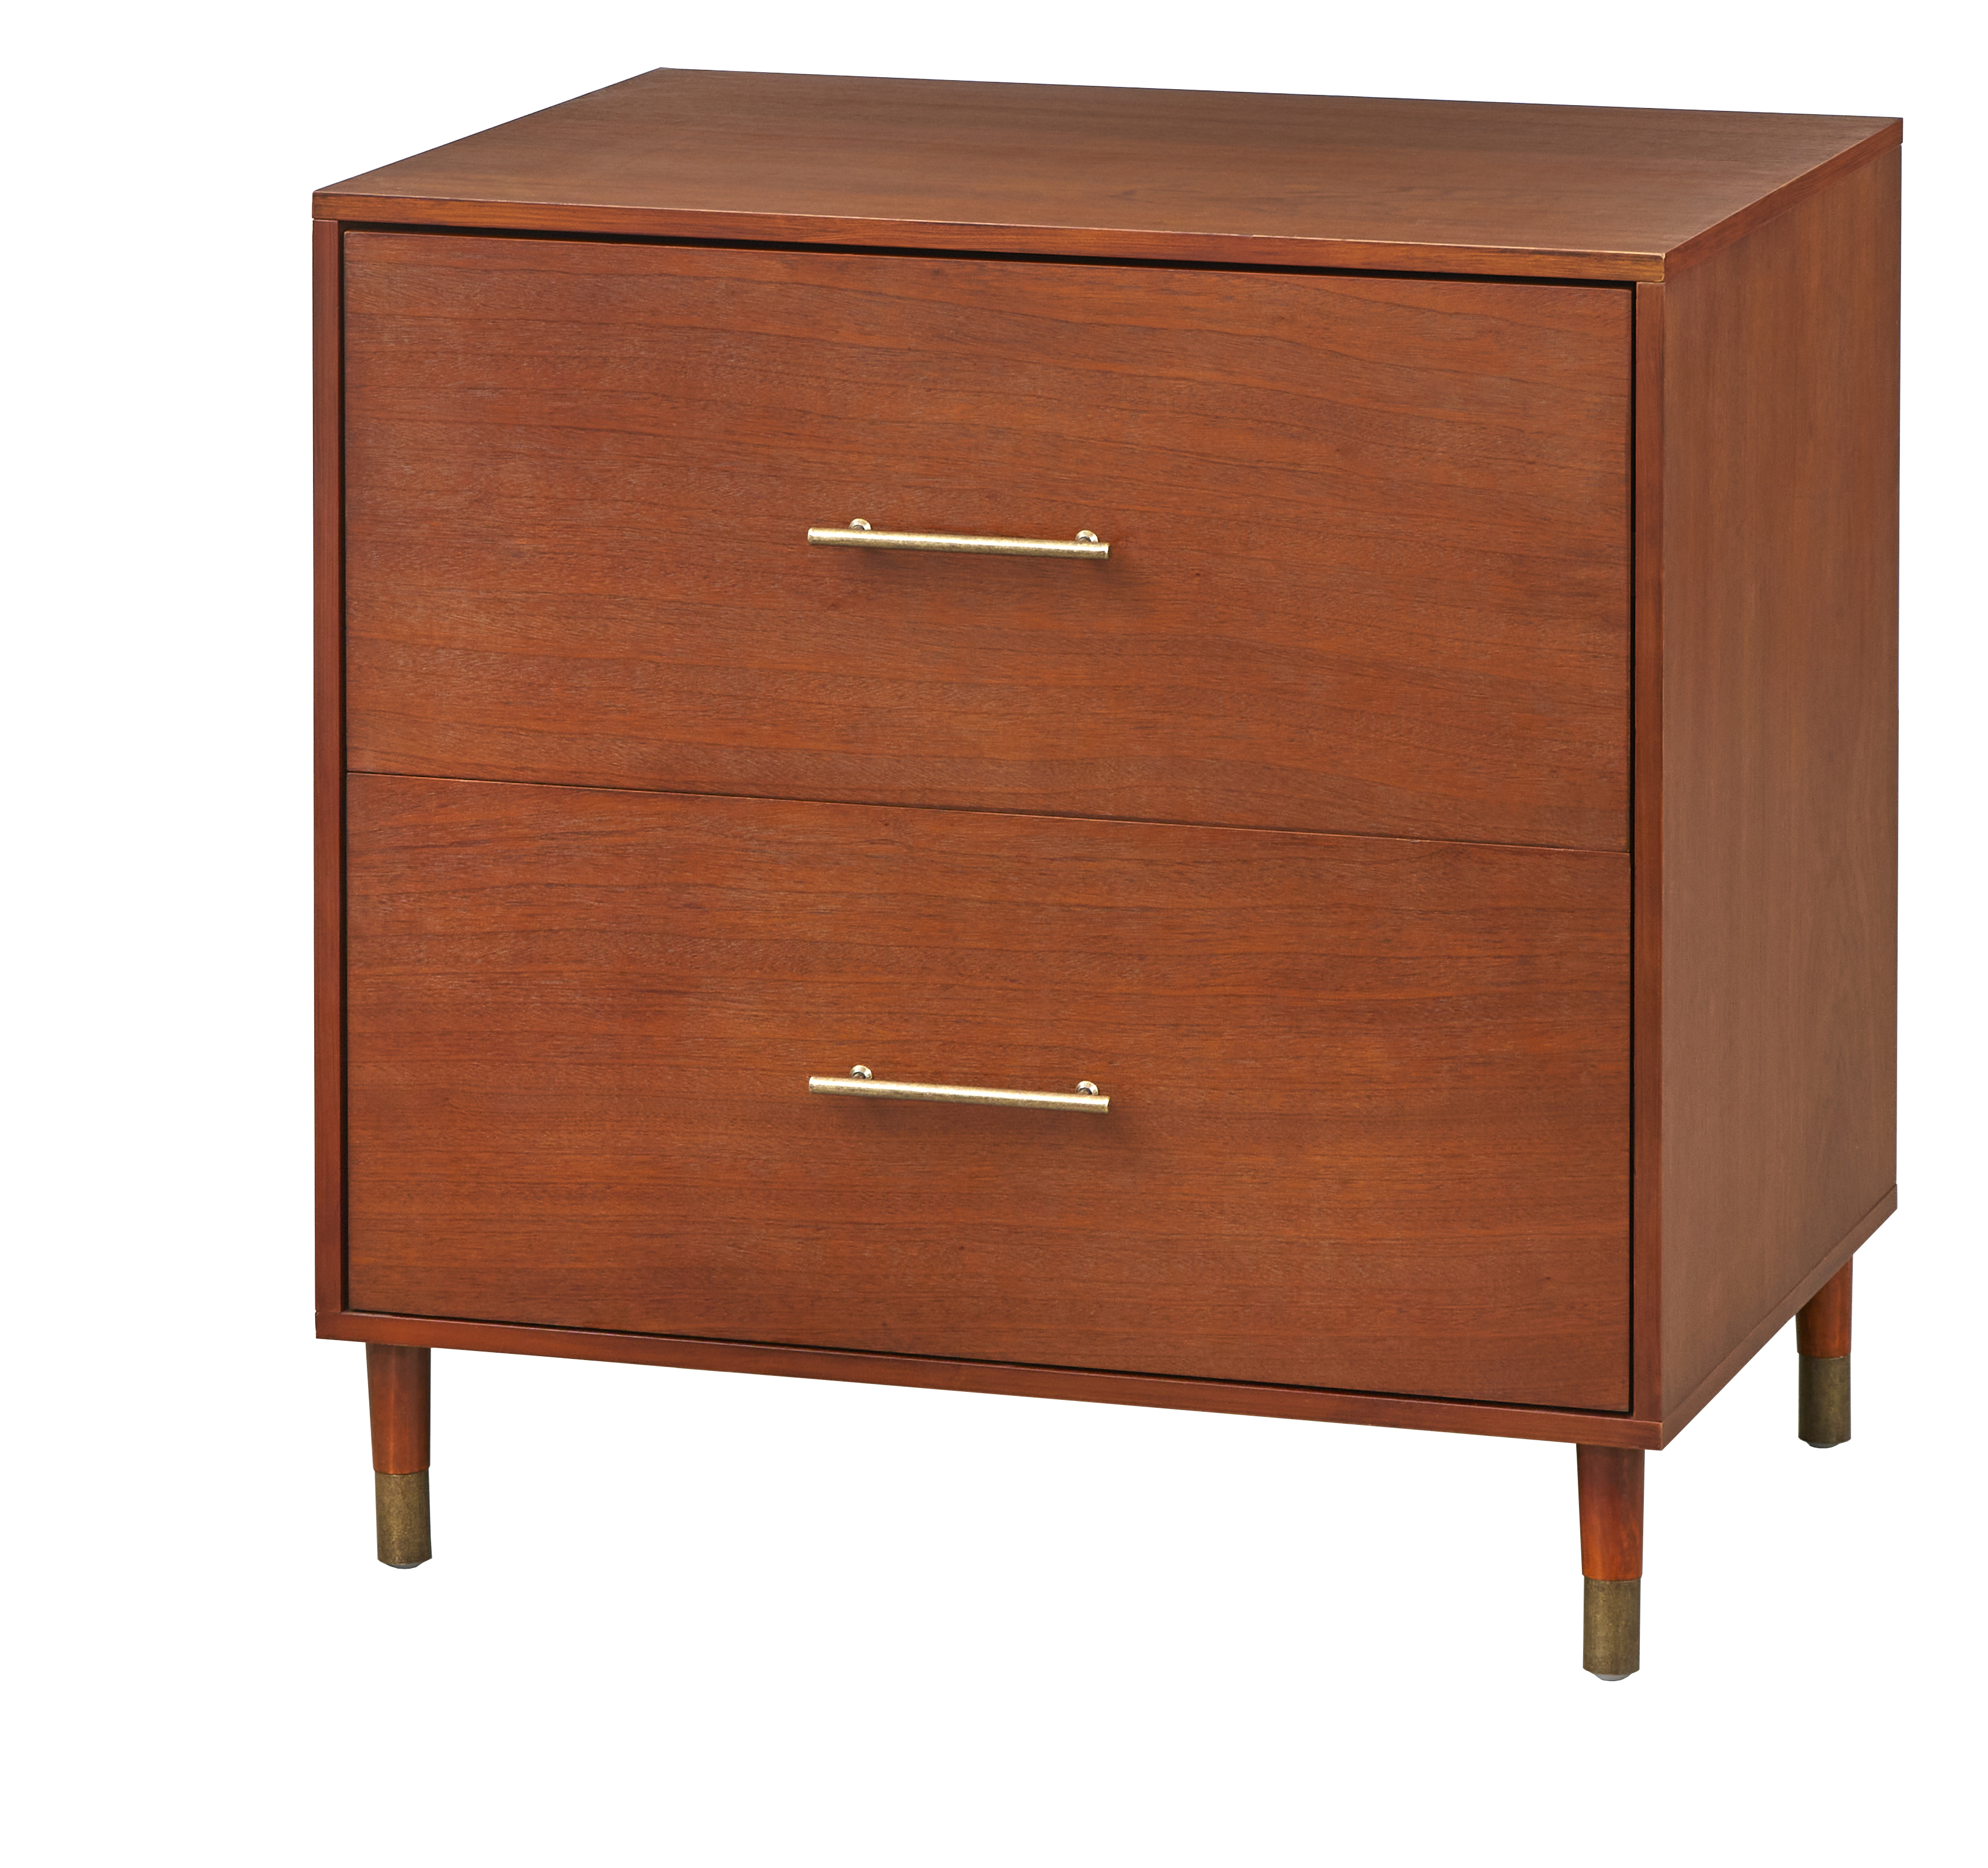 TMS Thompson Lateral Wood Filing Cabinet, Walnut - image 2 of 5